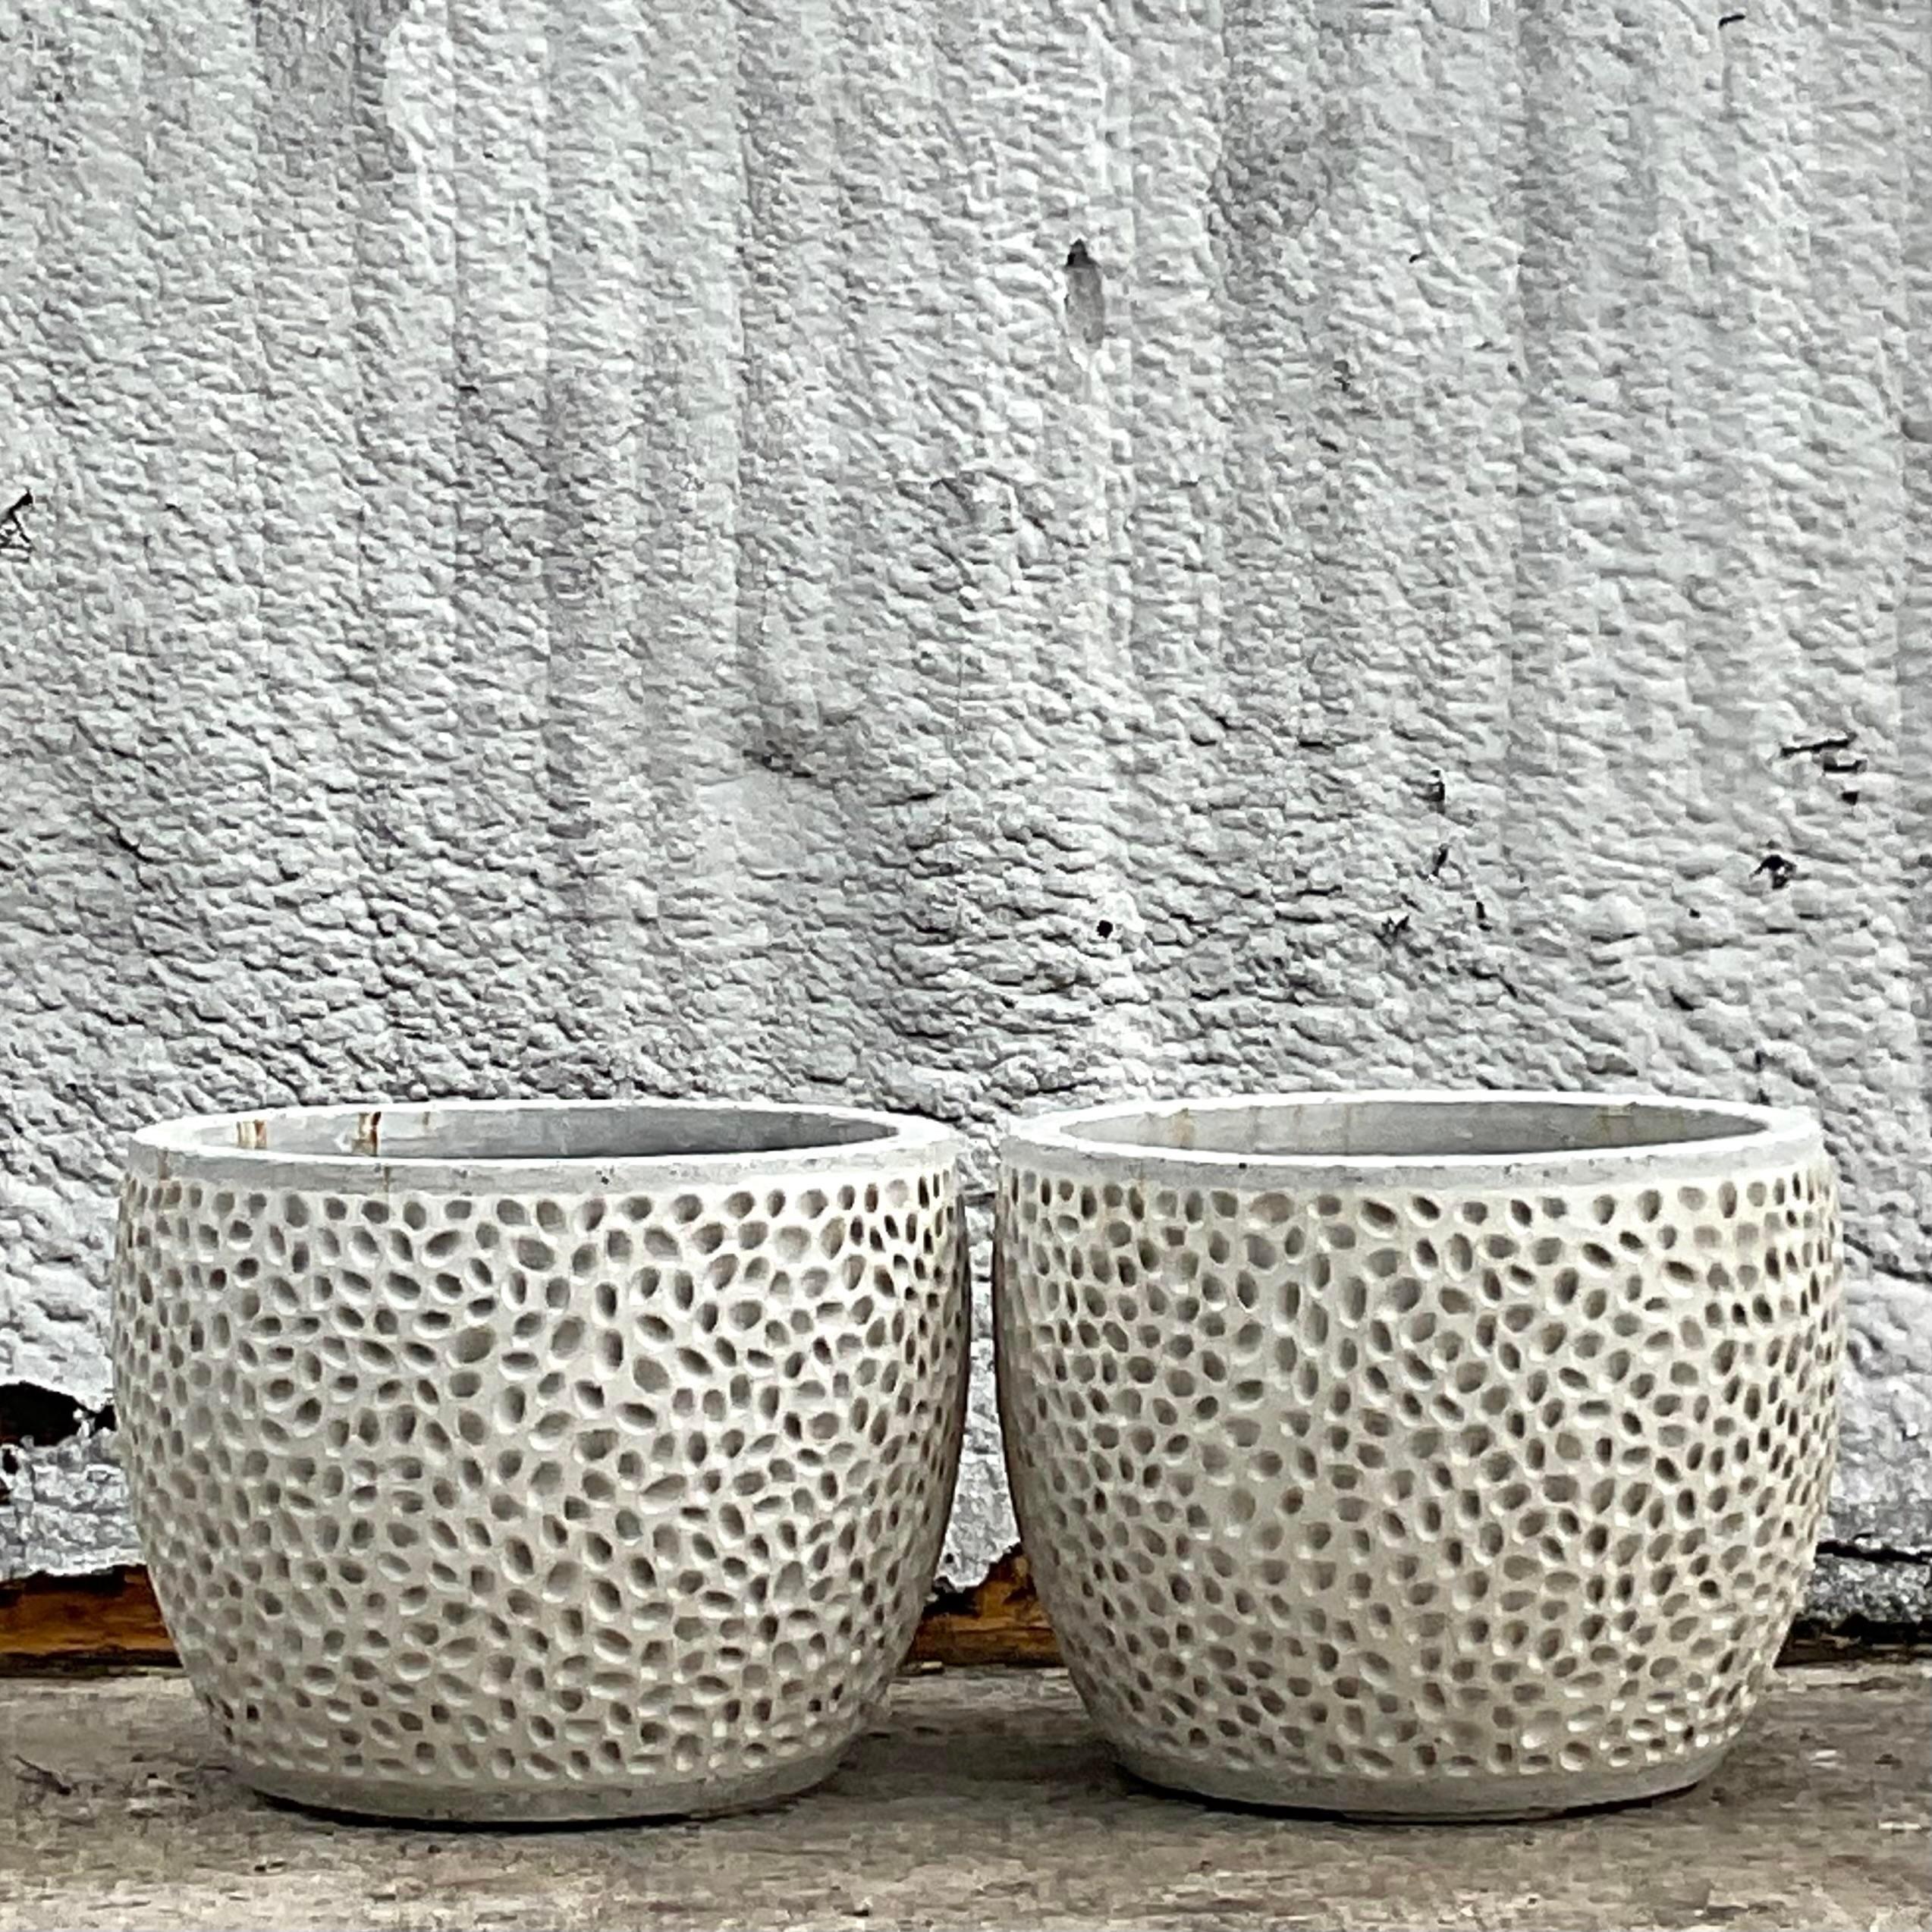 A fabulous pair of vintage Coastal planters. A cast concrete with a chic dimpled design. A clean and modern design. Acquired from a Palm Beach estate.